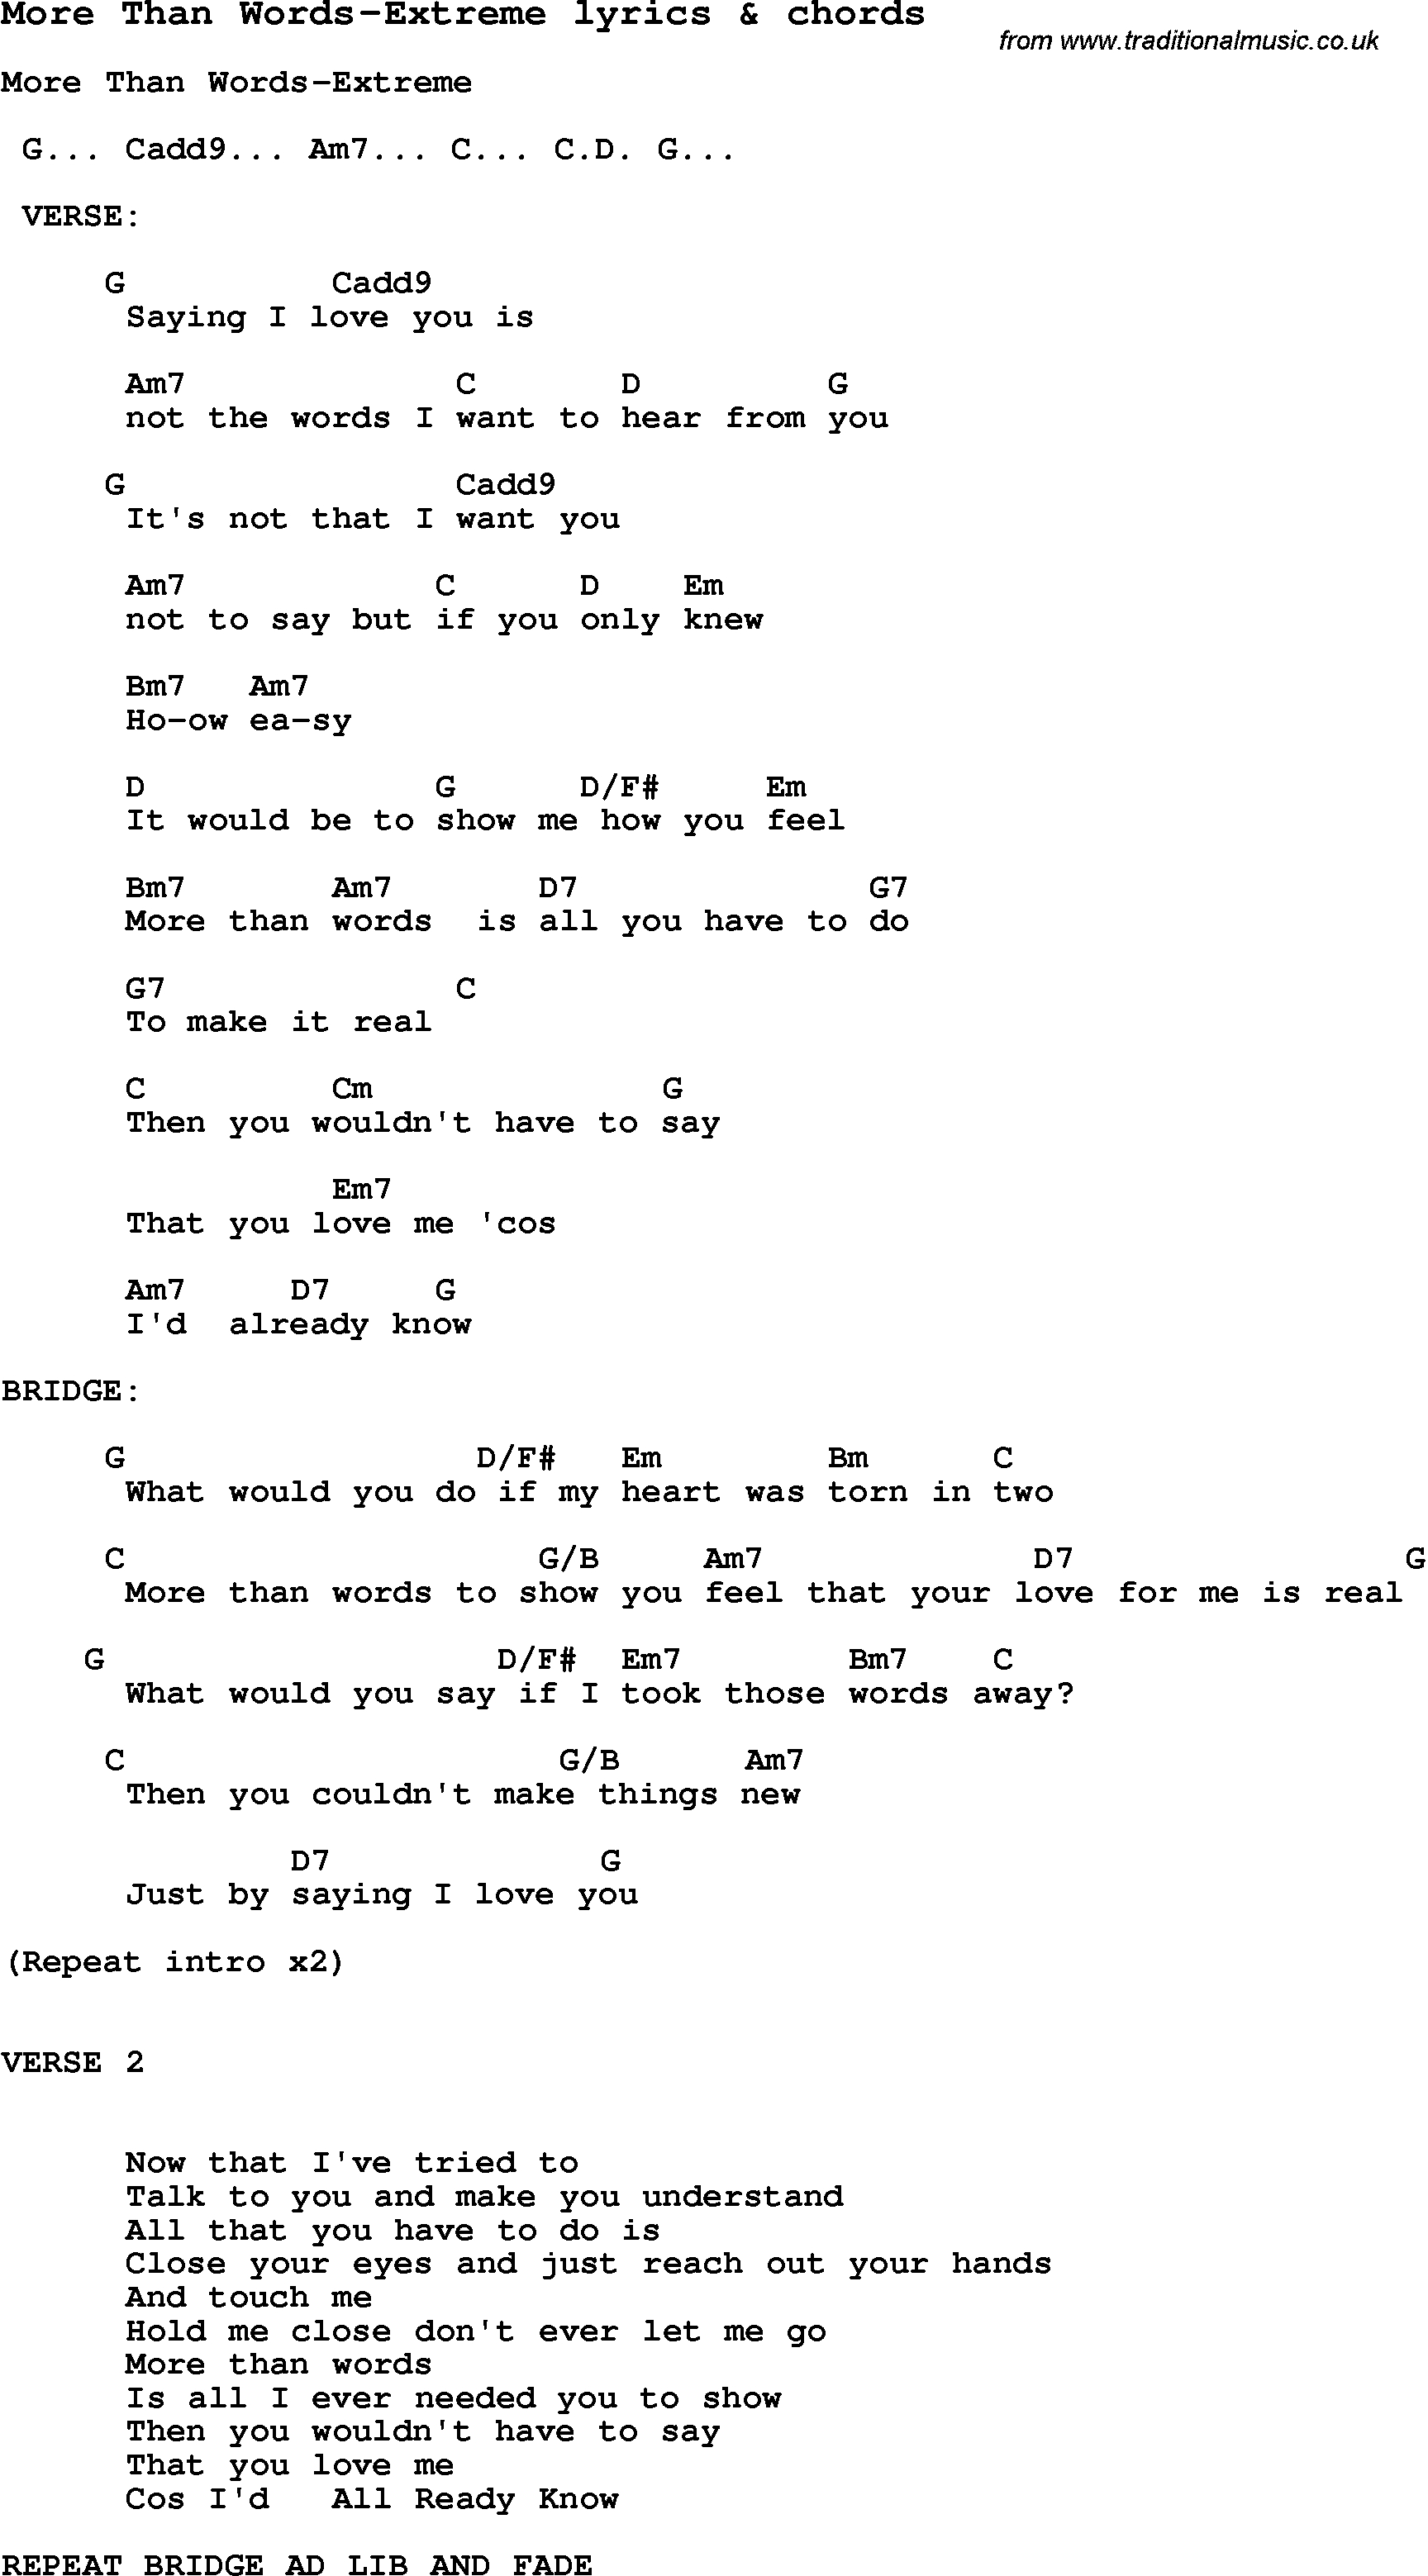 More Than Words Chords Love Song Lyrics Formore Than Words Extreme With Chords